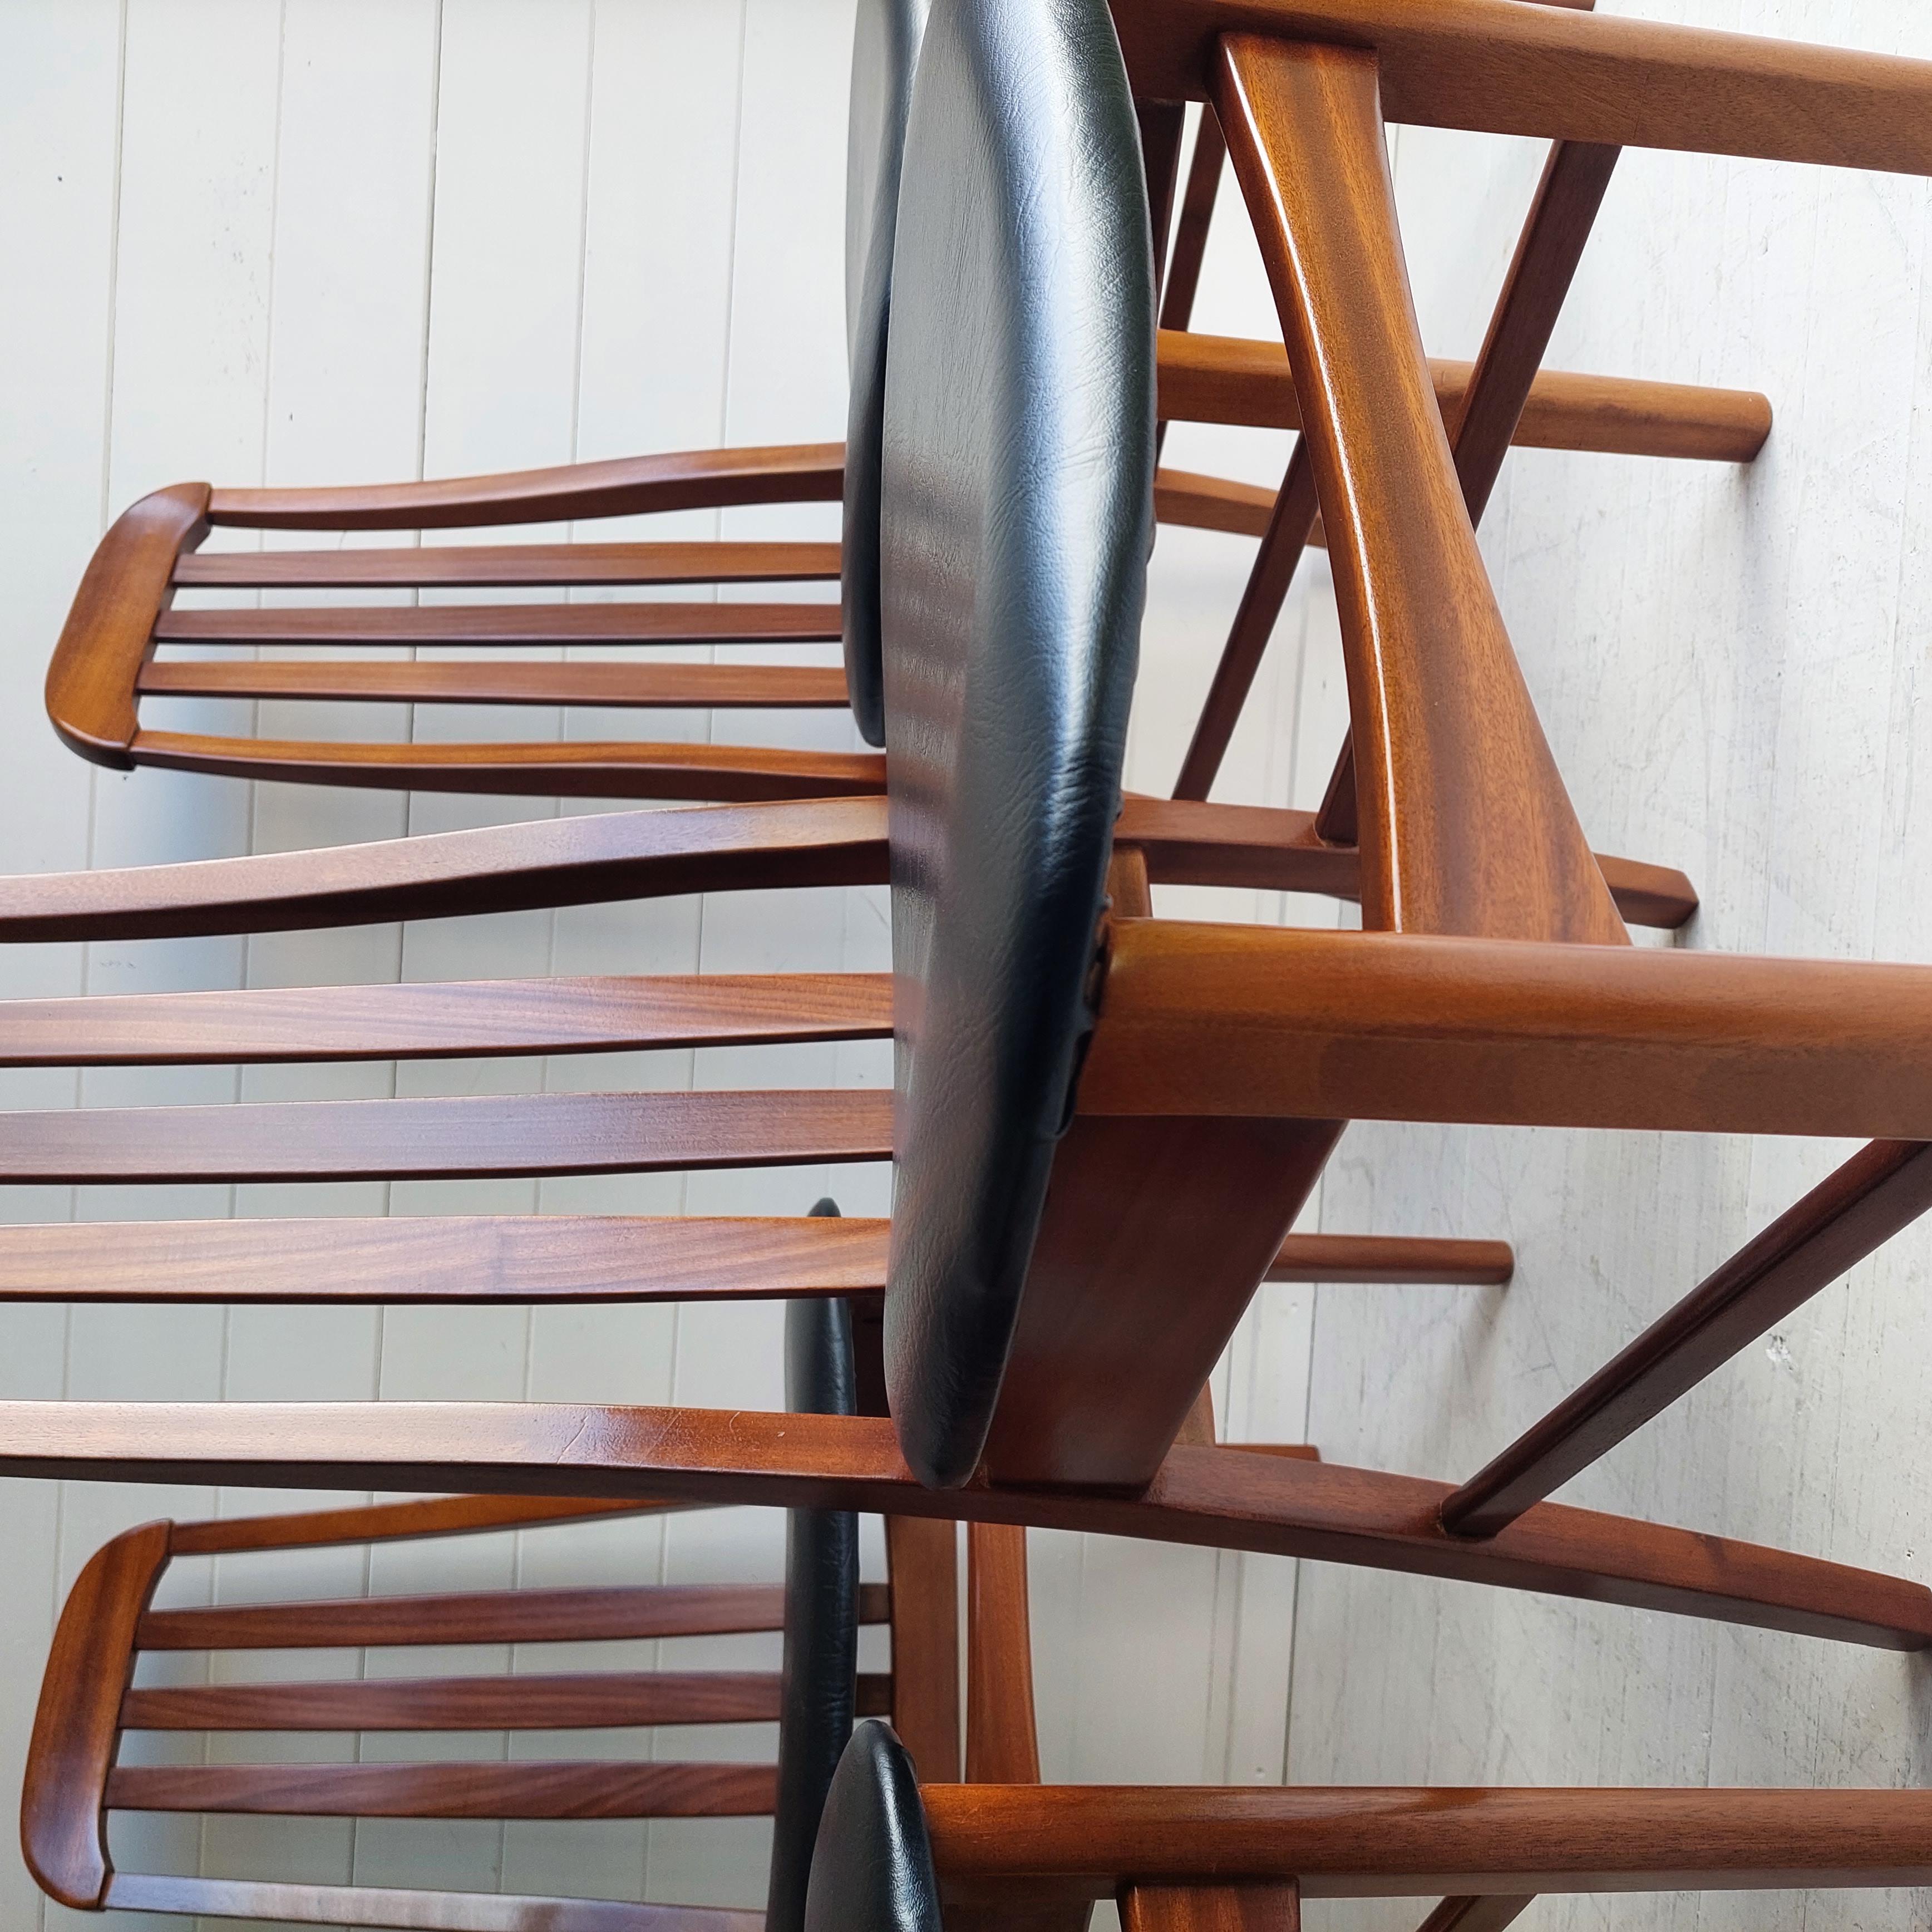 British Mid entury Teak Dining Chairs by Jentique Niels Koefoed Style, 1970s Set of 4